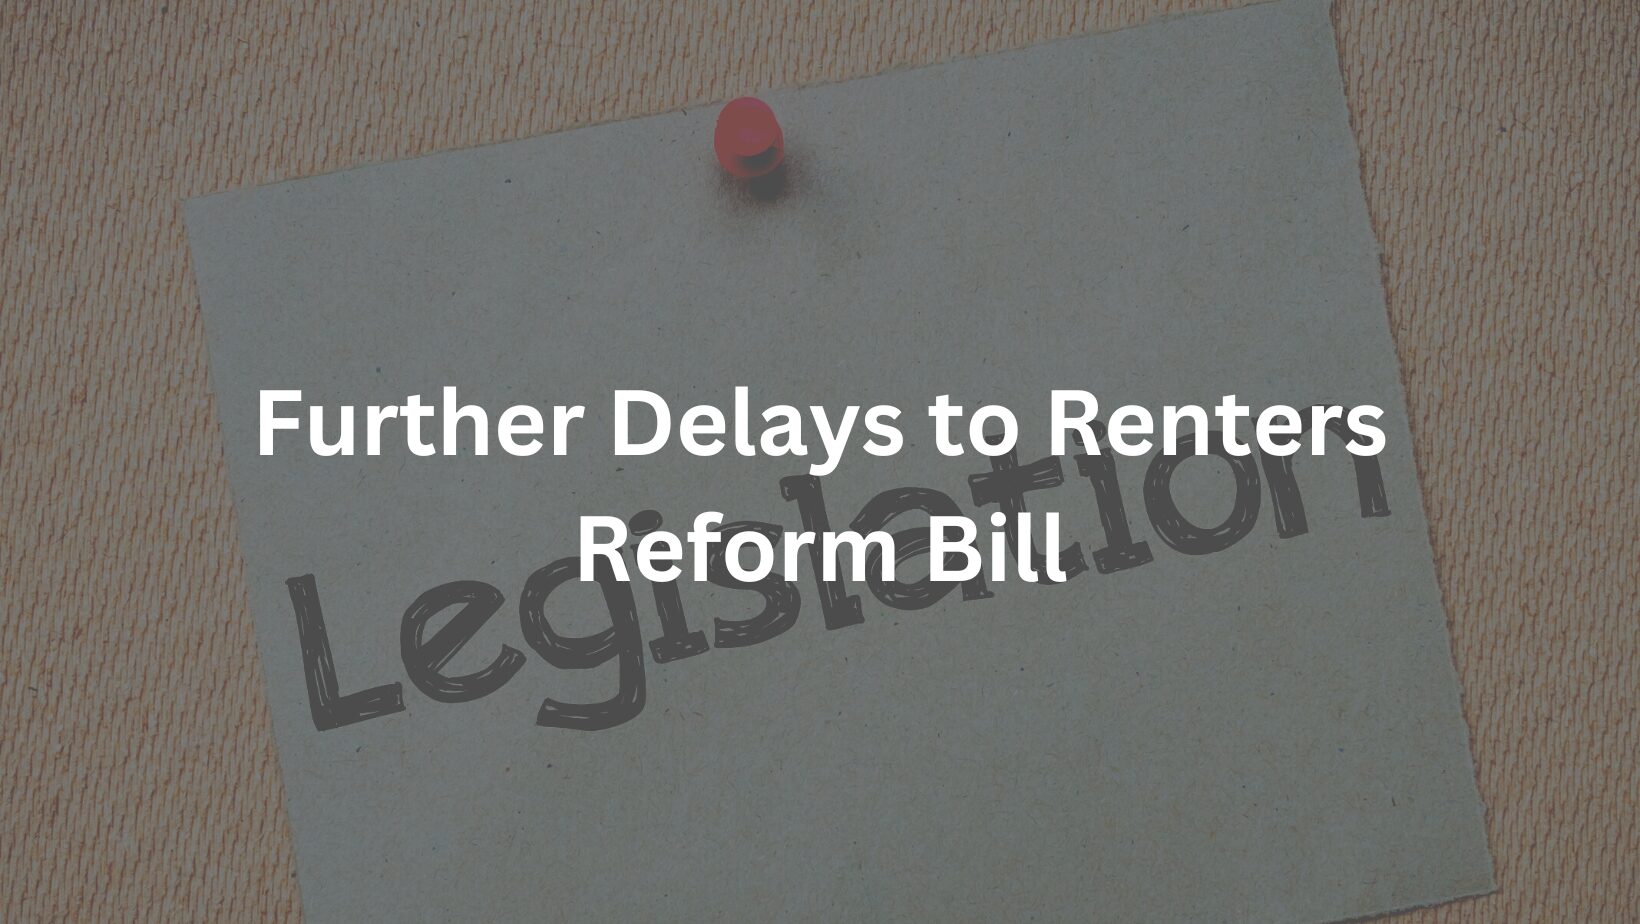 Further Delays to Renters Reform Bill